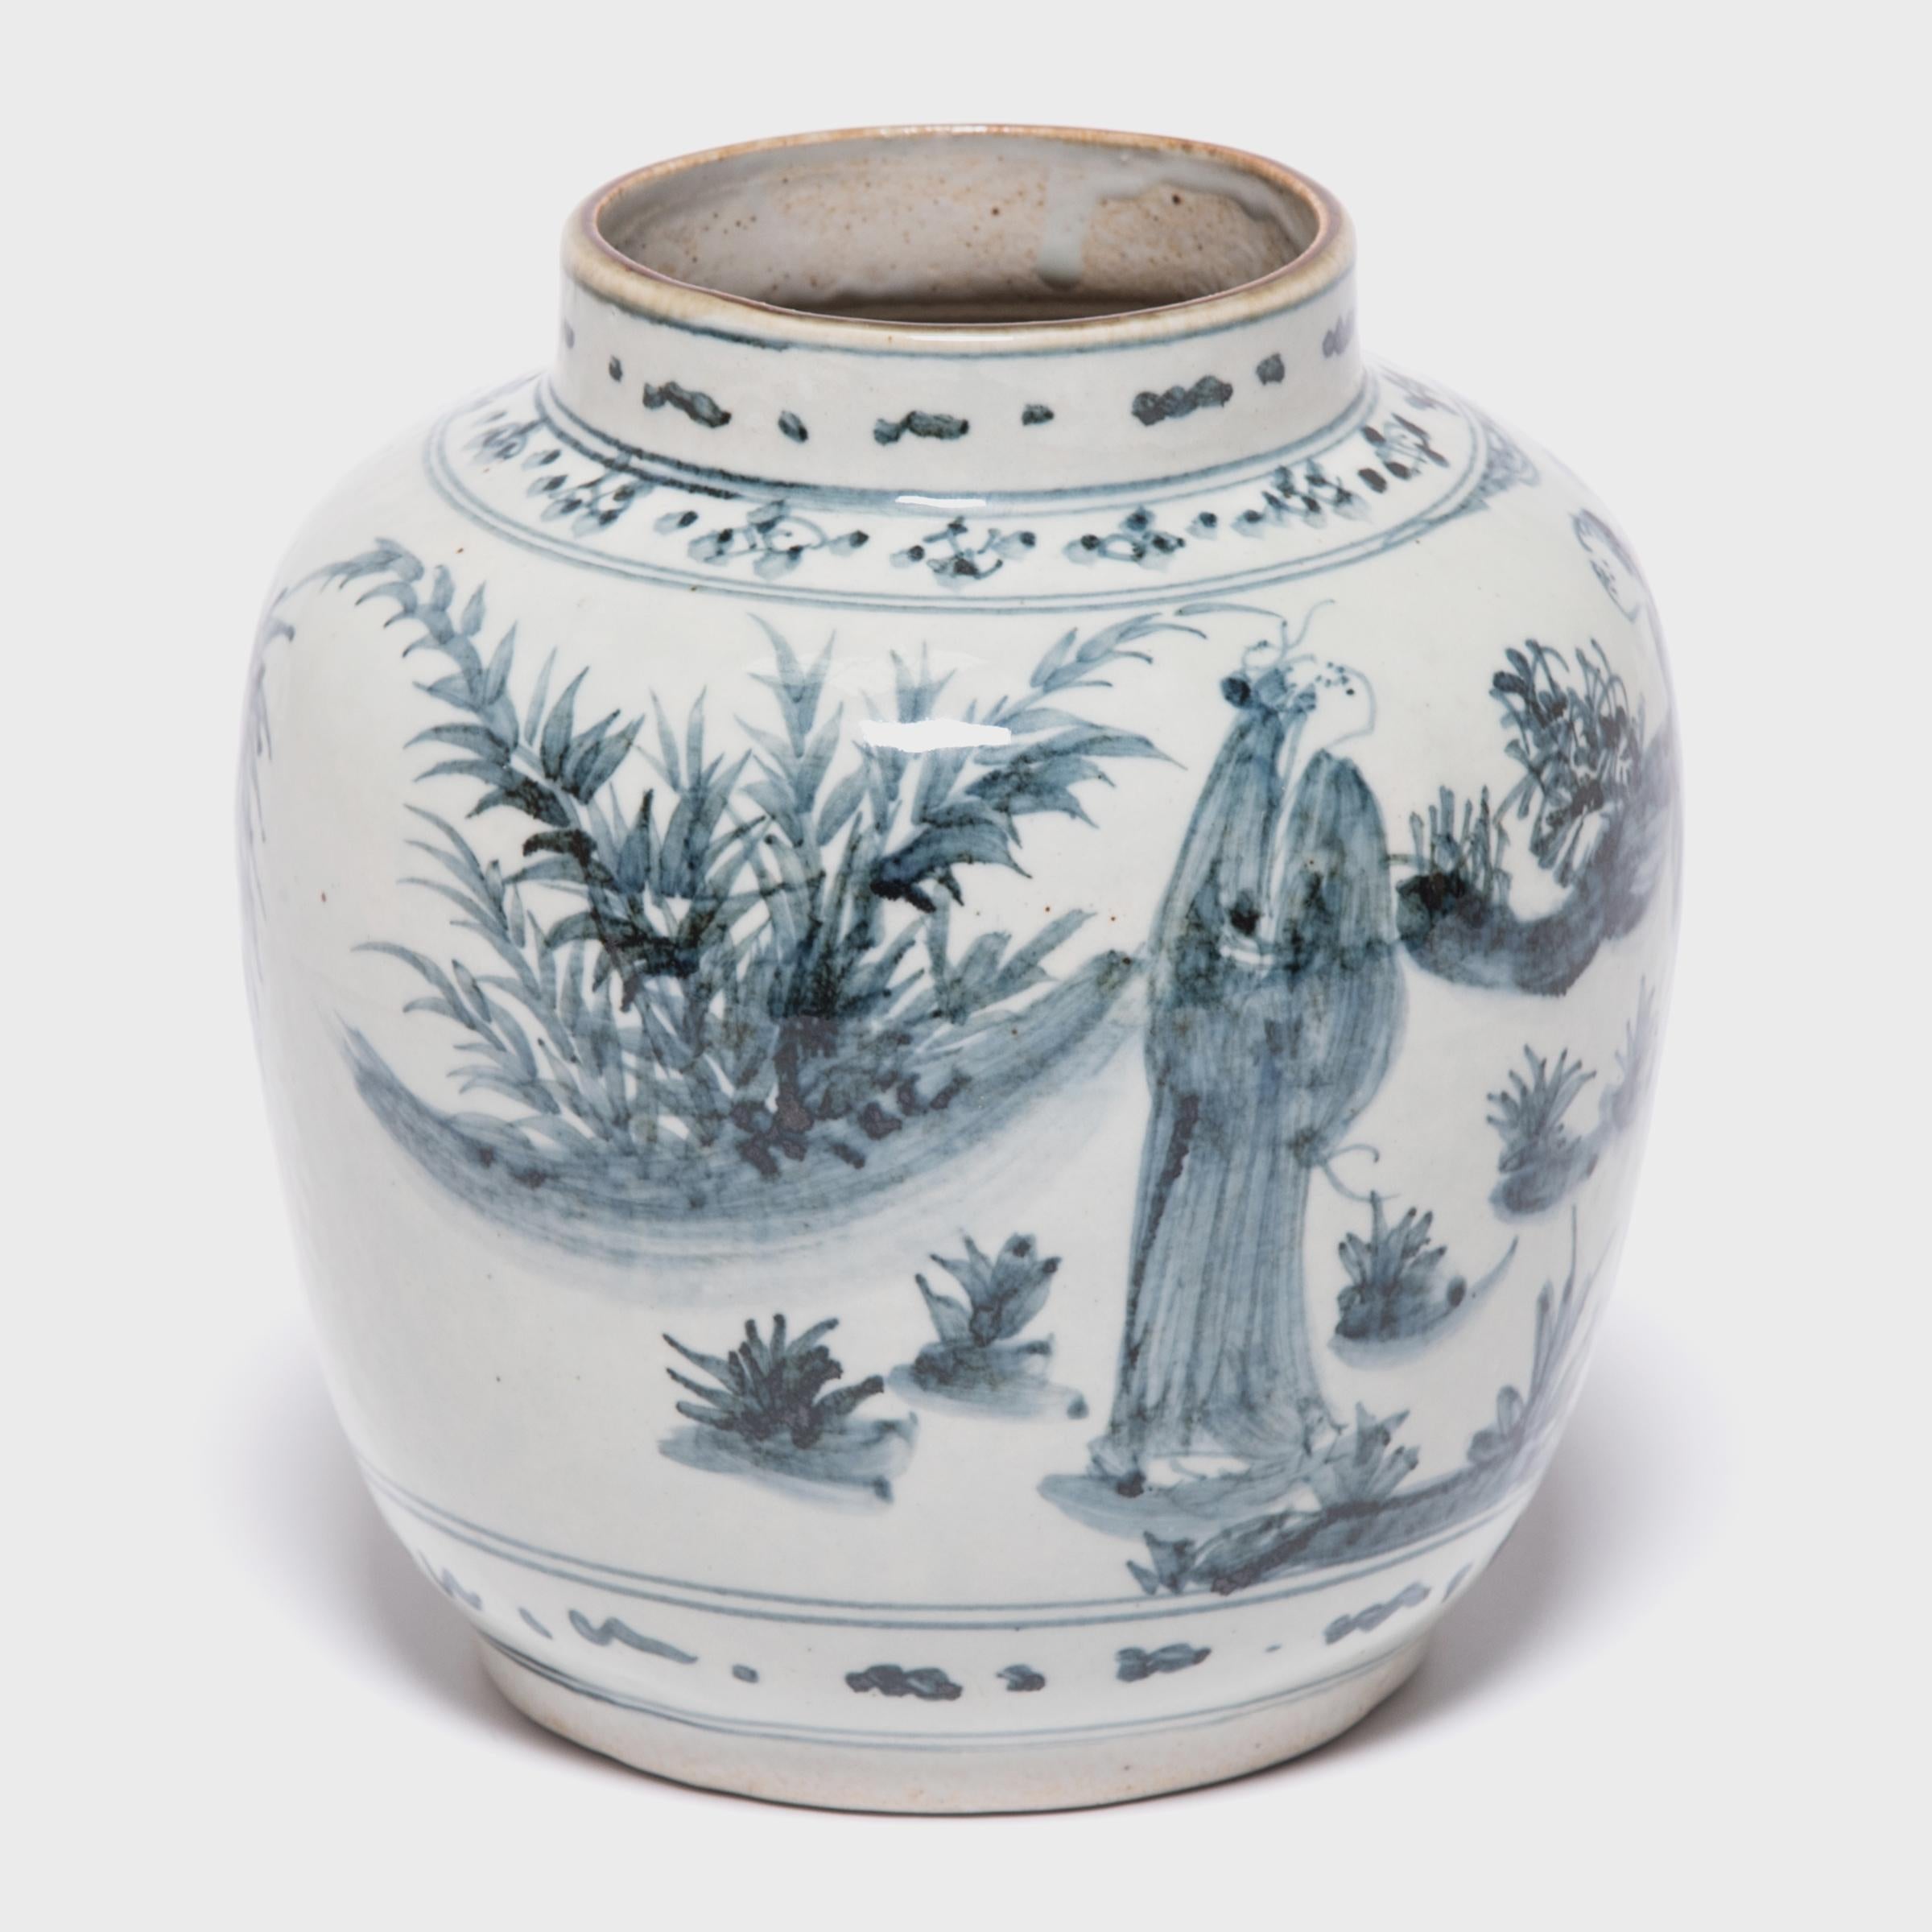 A connoisseur of fine ceramics, the scholar who owned this jar surely demonstrated his vast knowledge of the time-honored technique of blue and white glazing by proudly displaying it among his prized objects. A departure from the more carefully